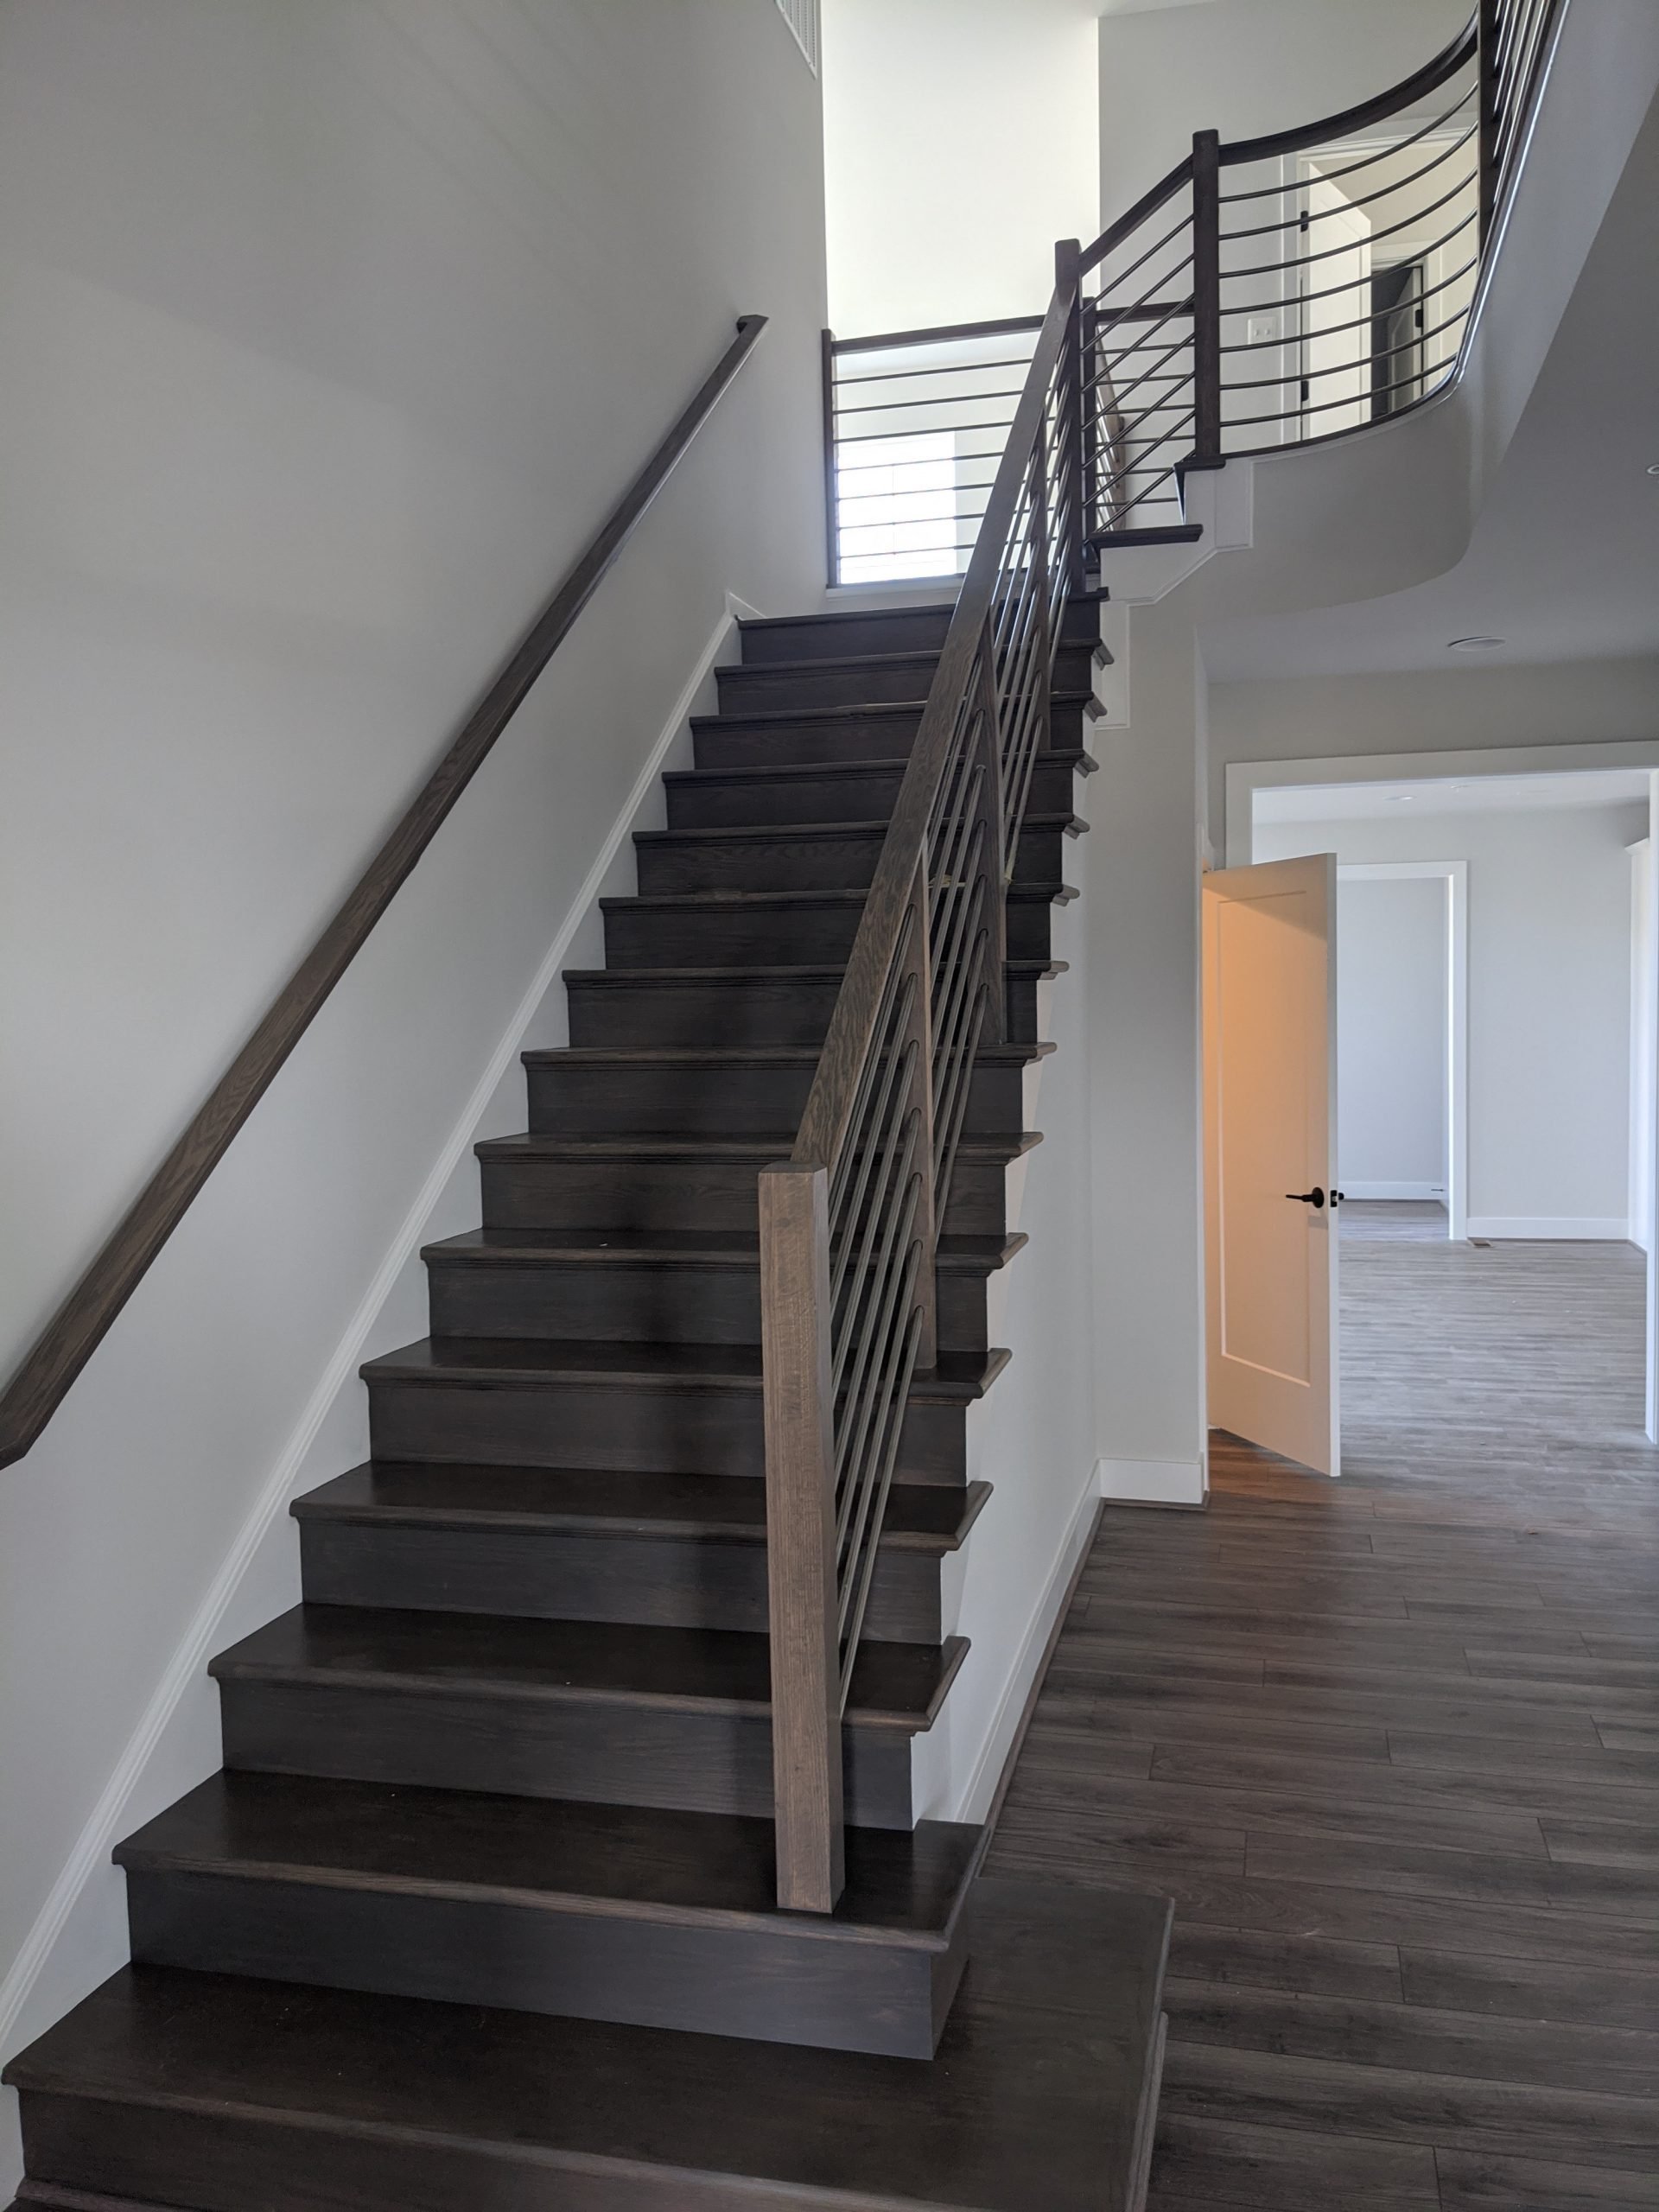 This showcases a completed loudoun stairs project within a home in northern virginia. 